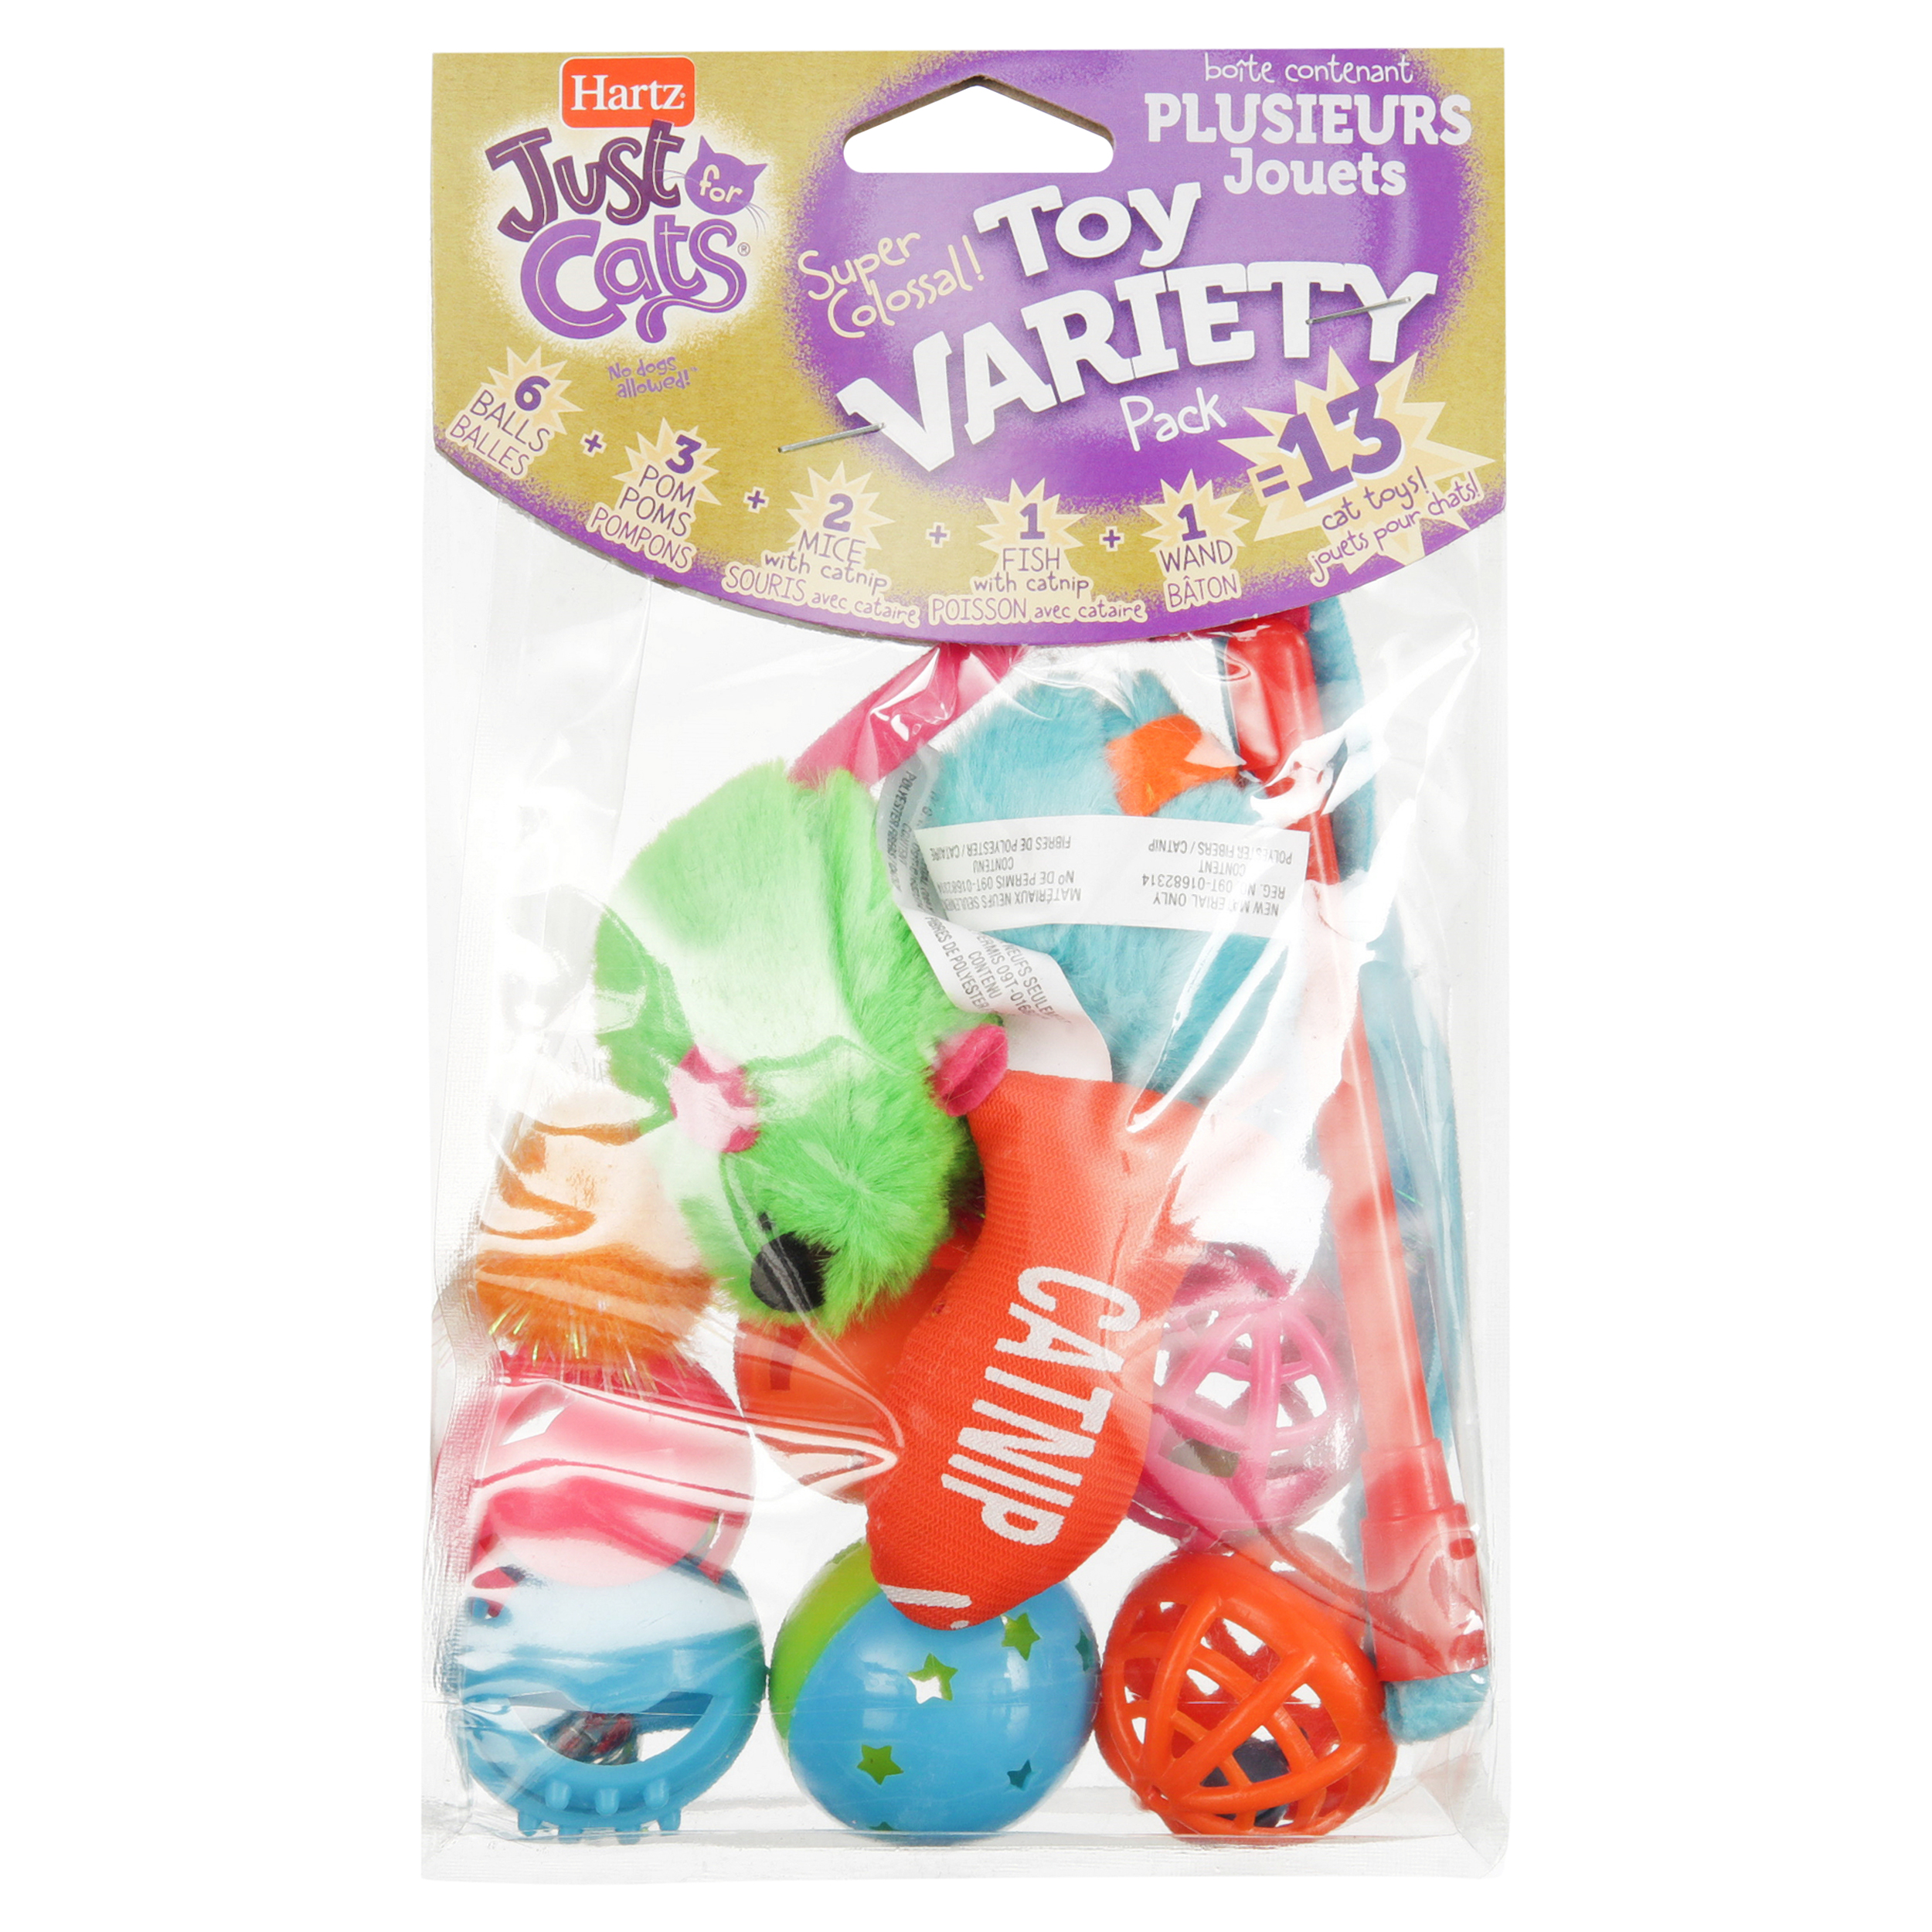 Hartz Just For Cats Cat Toy Variety Pack, 13 Count - image 1 of 5